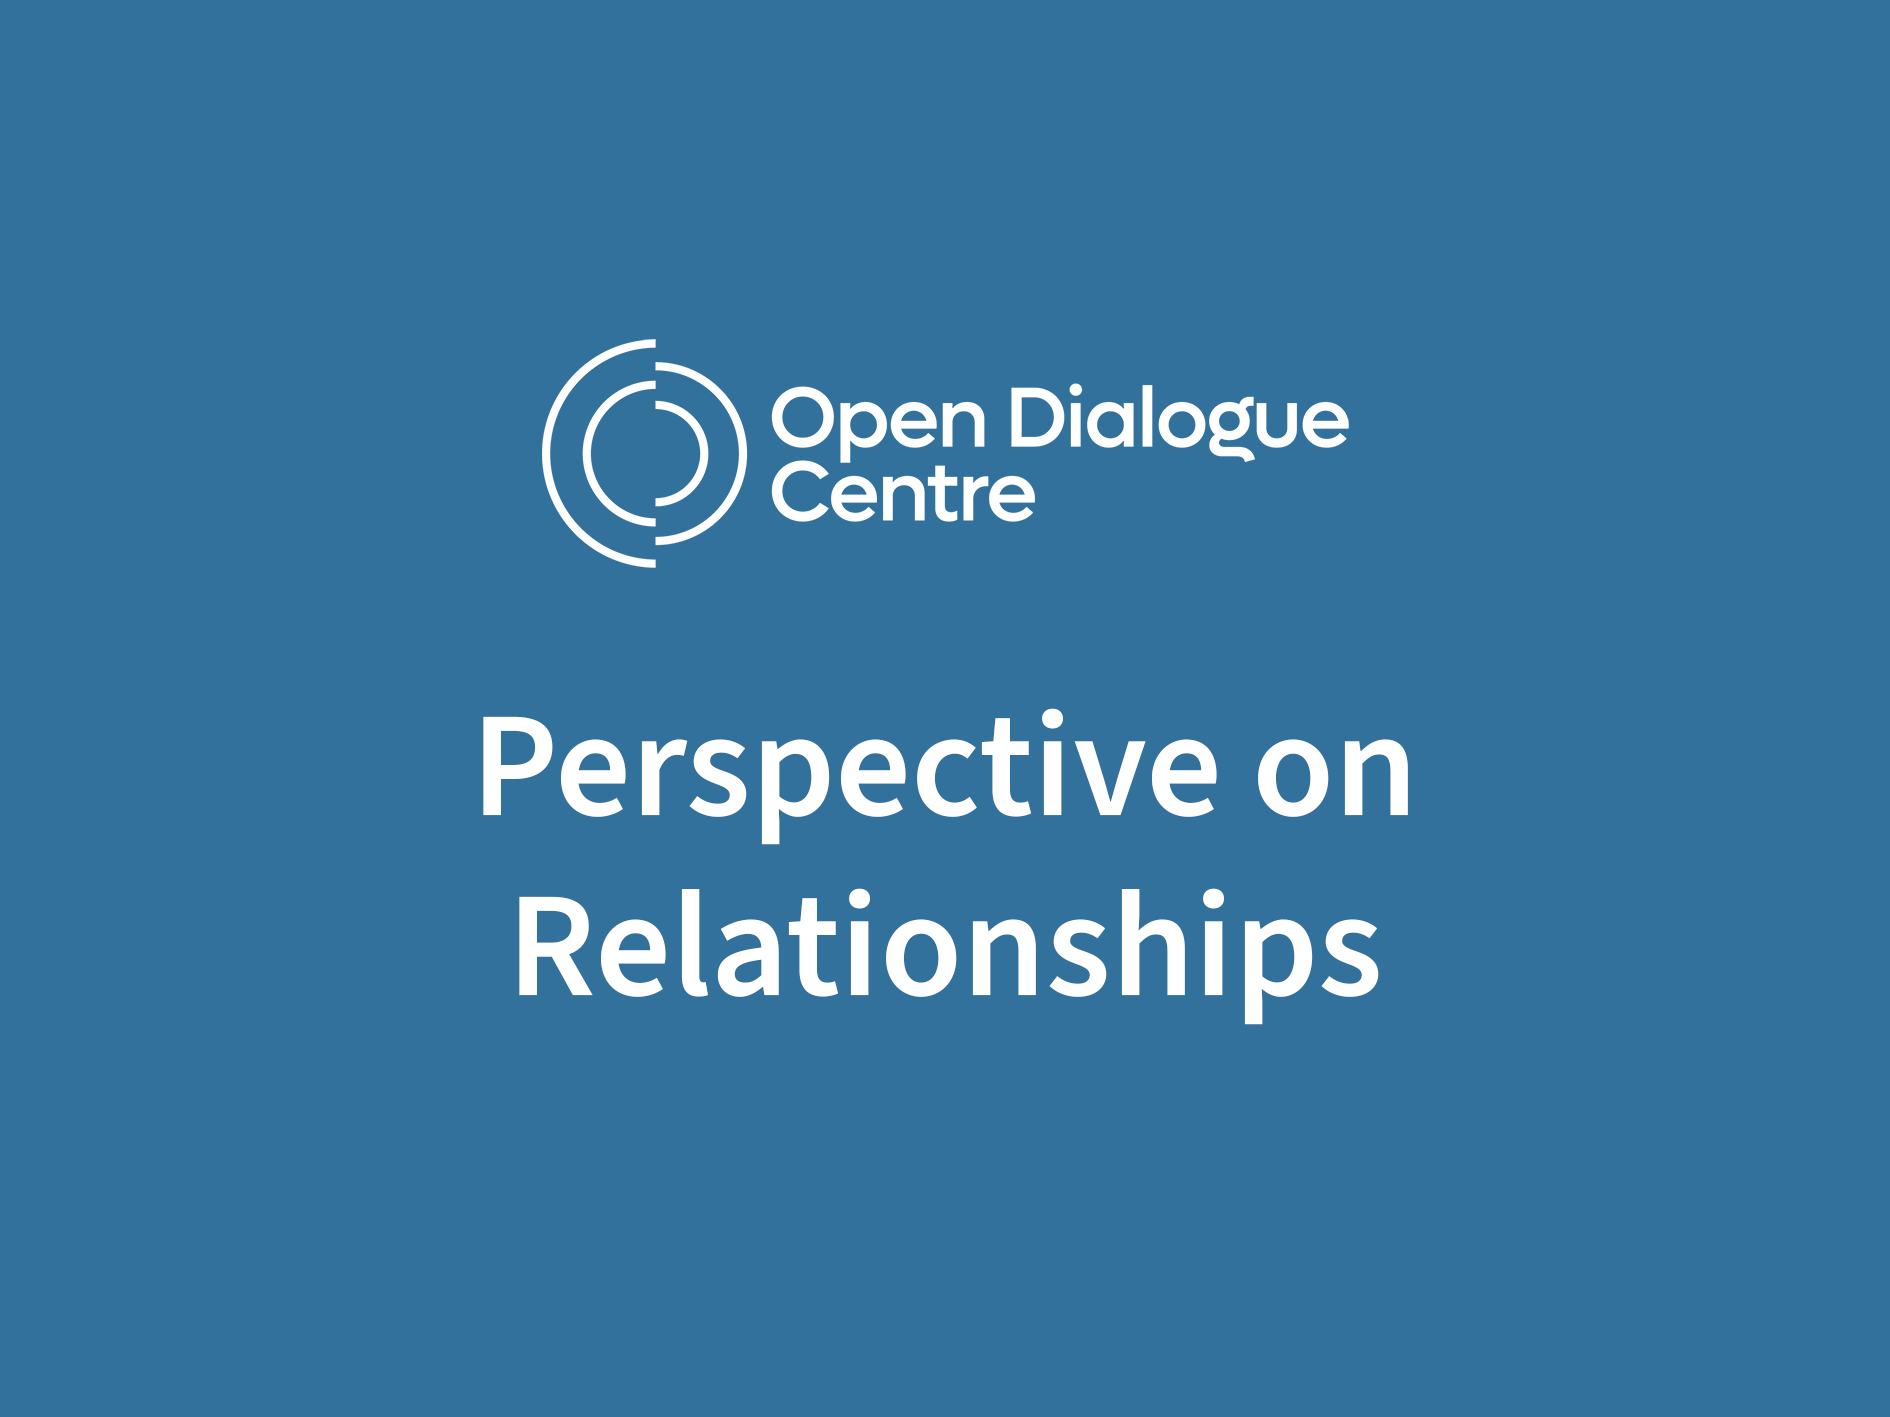 Open Dialogue Centre - Perspective on Relationships